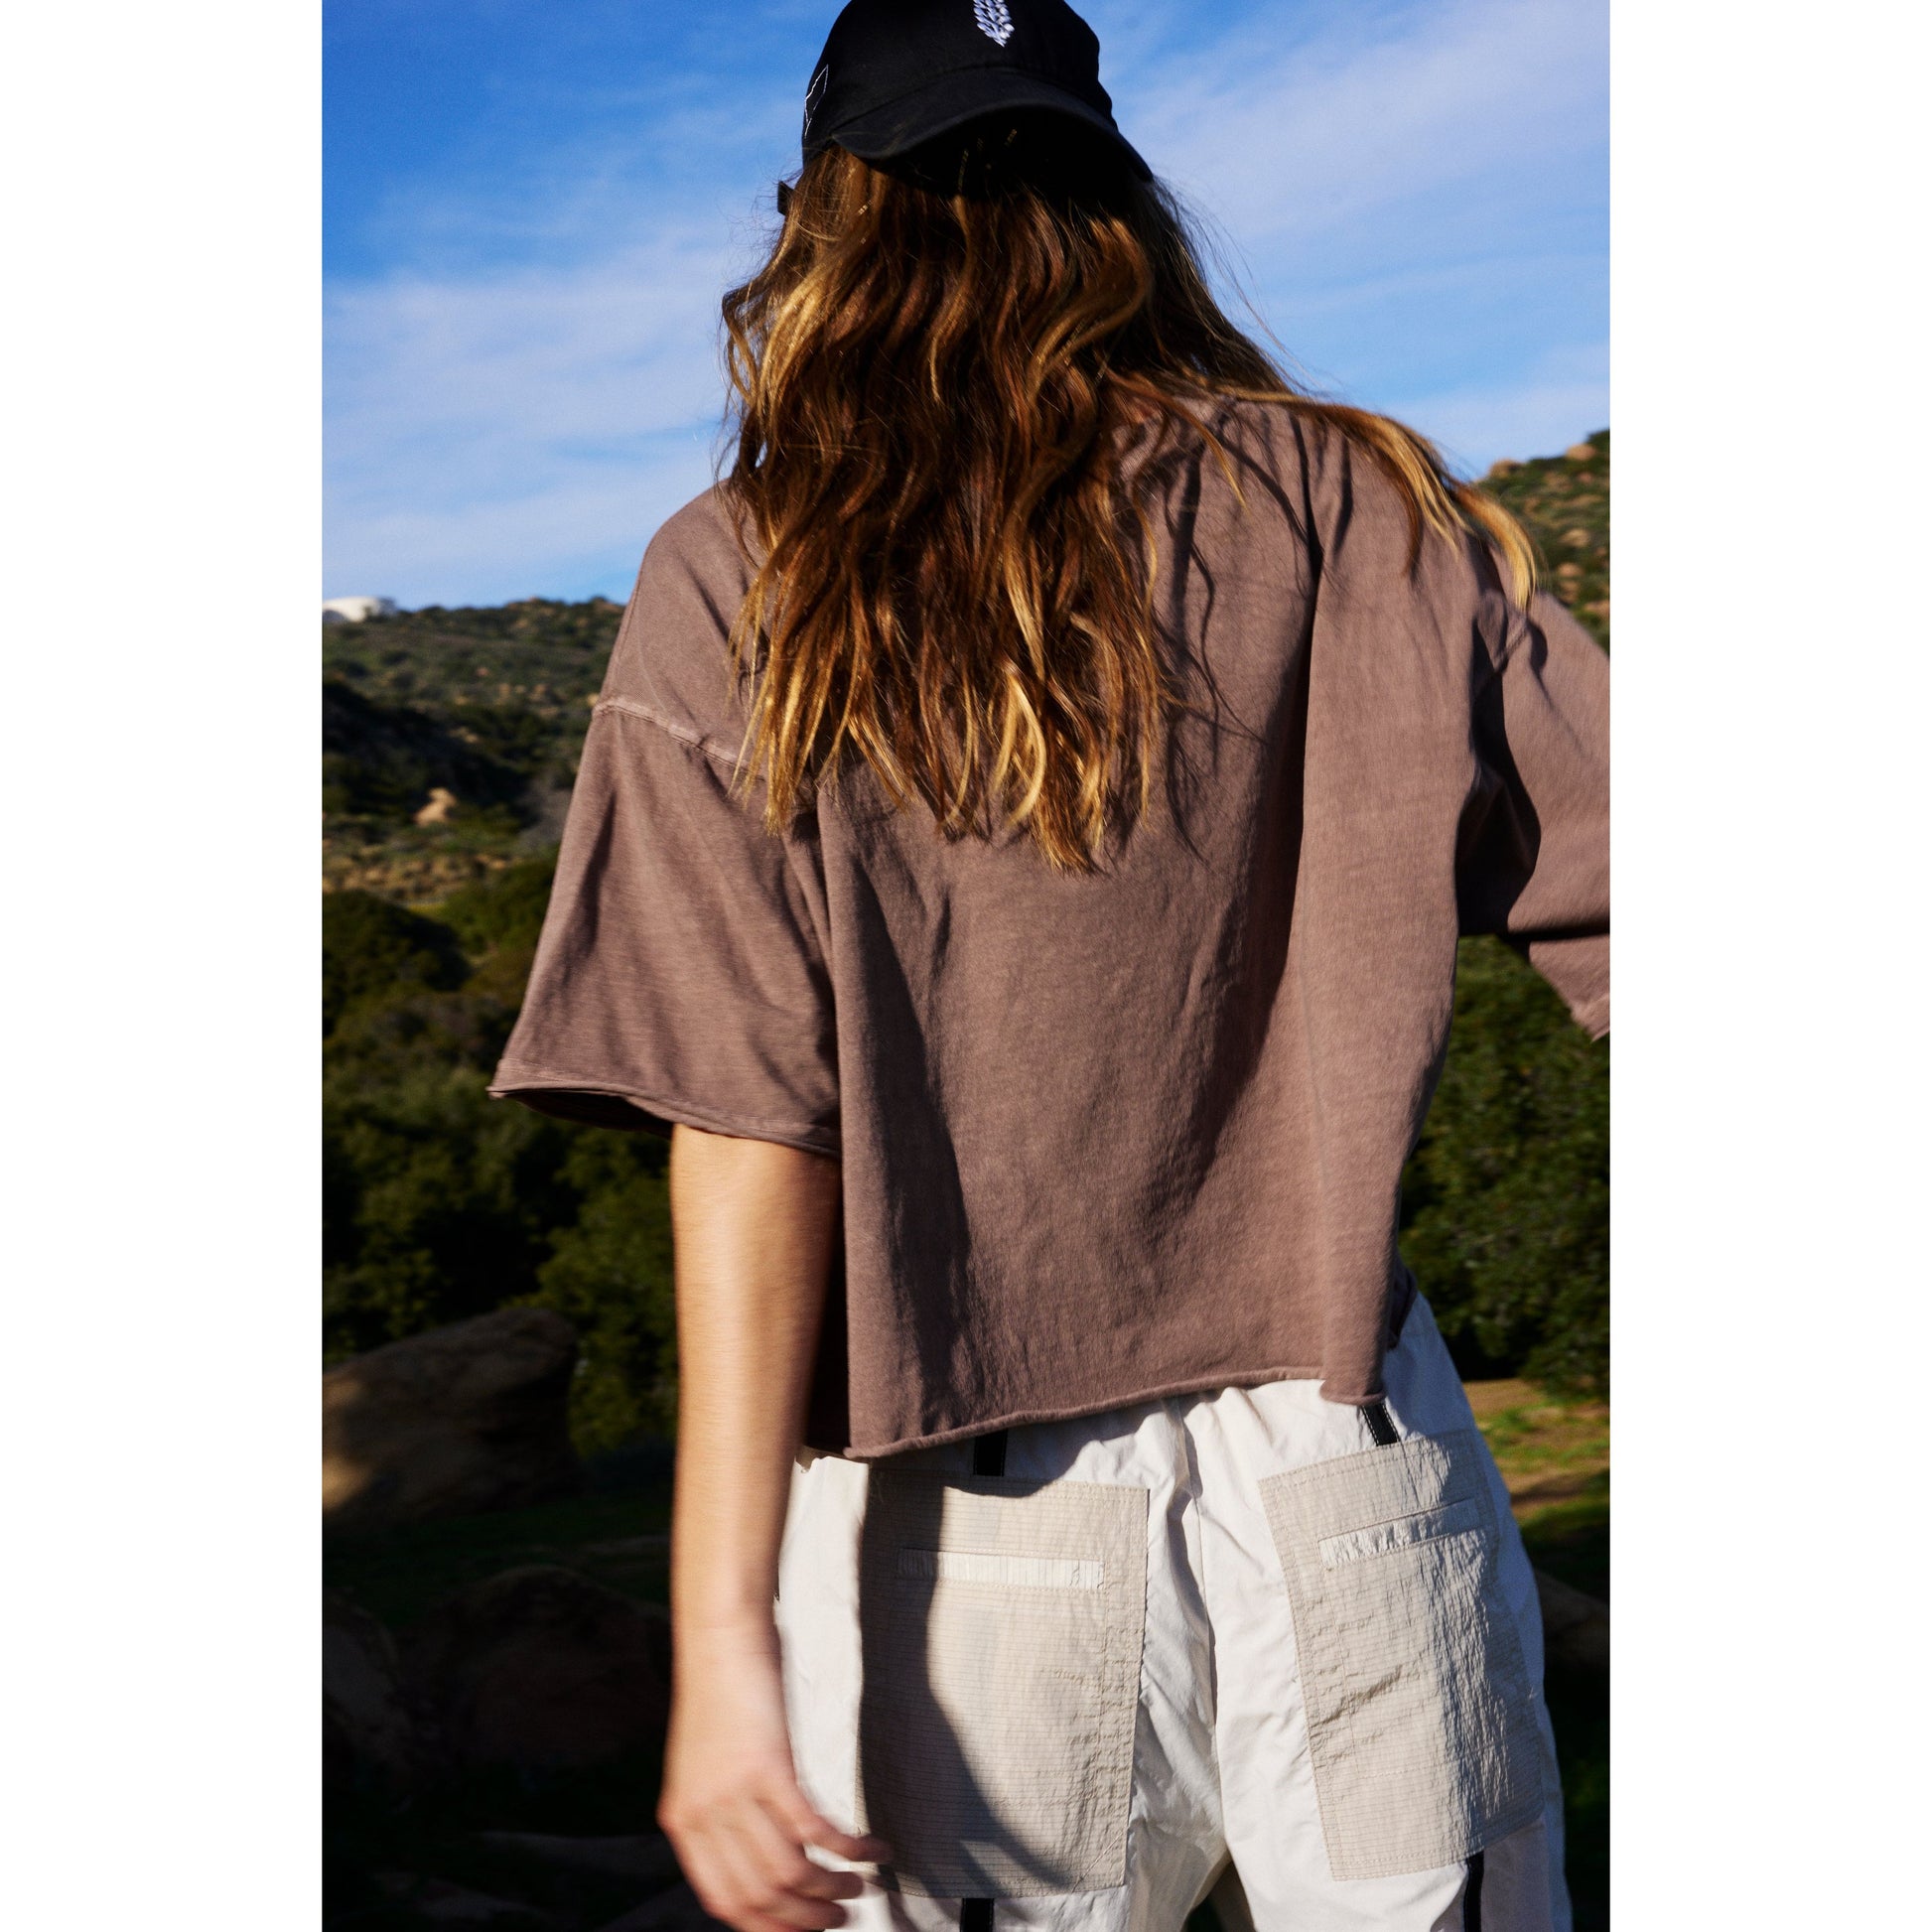 Woman with long hair standing outdoors, facing away, wearing a Wild Mustang Tee in a brown oversized boxy fit and white cargo pants, with a natural landscape in the background.